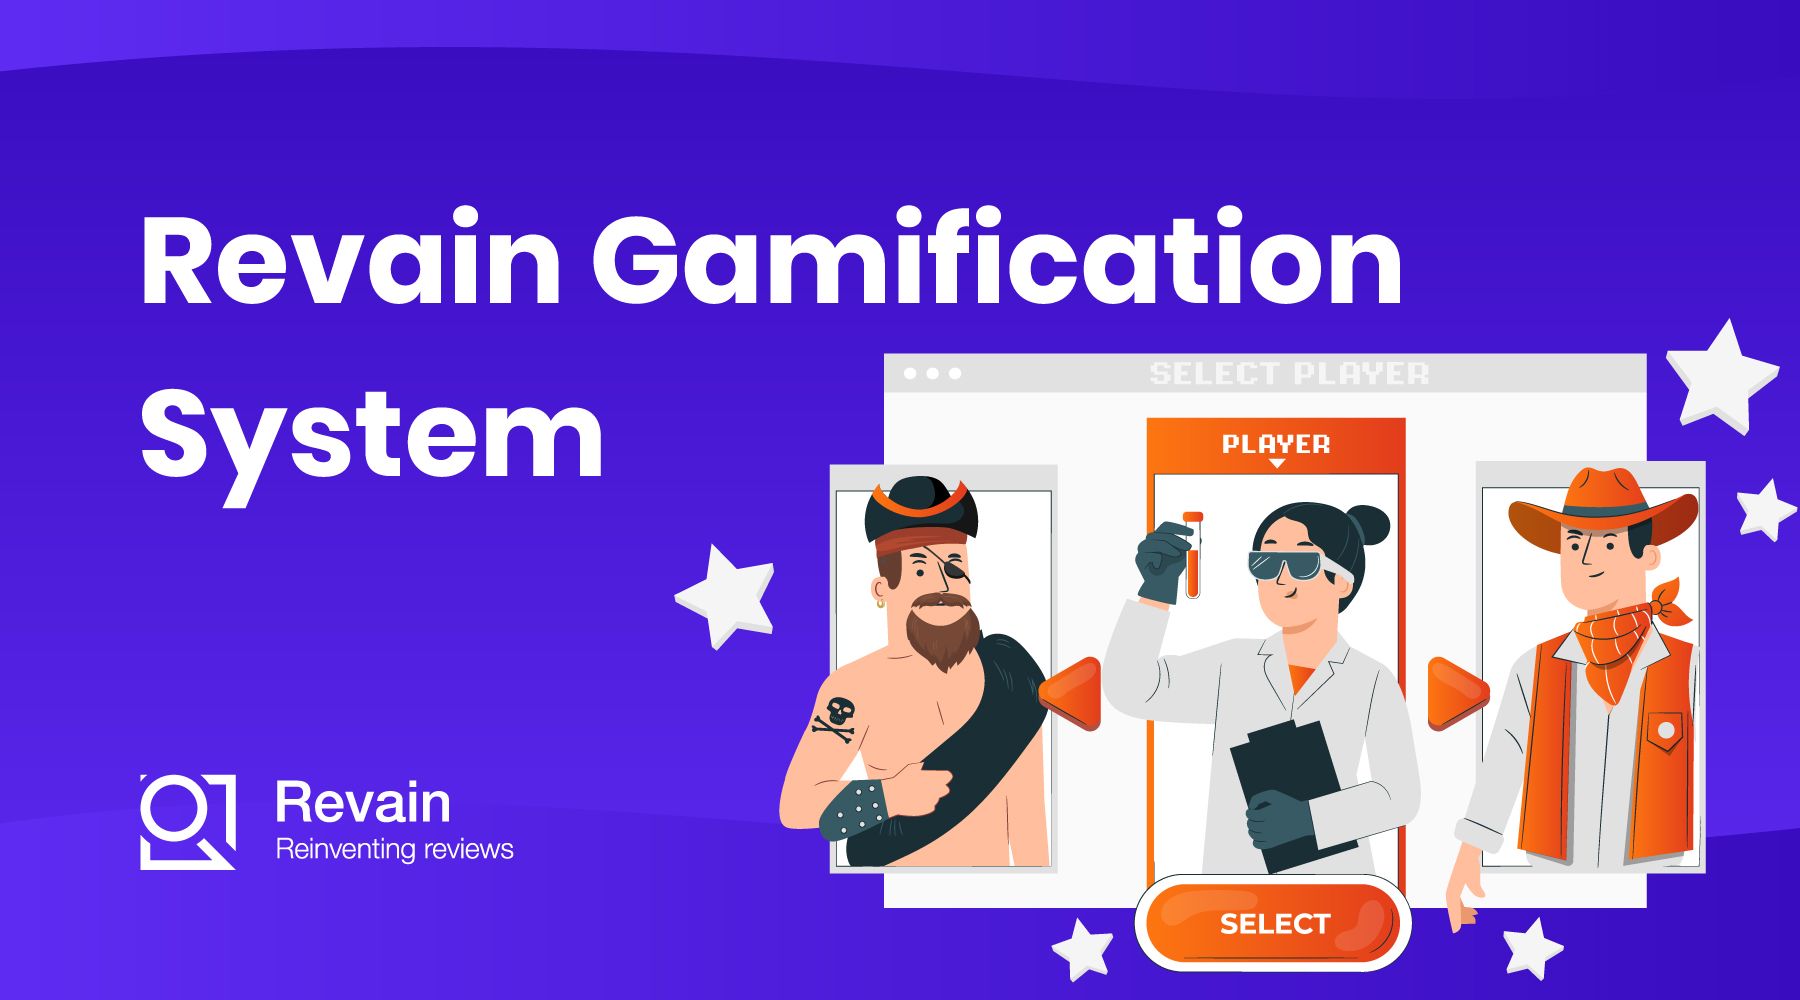 Article New Revain Gamification System